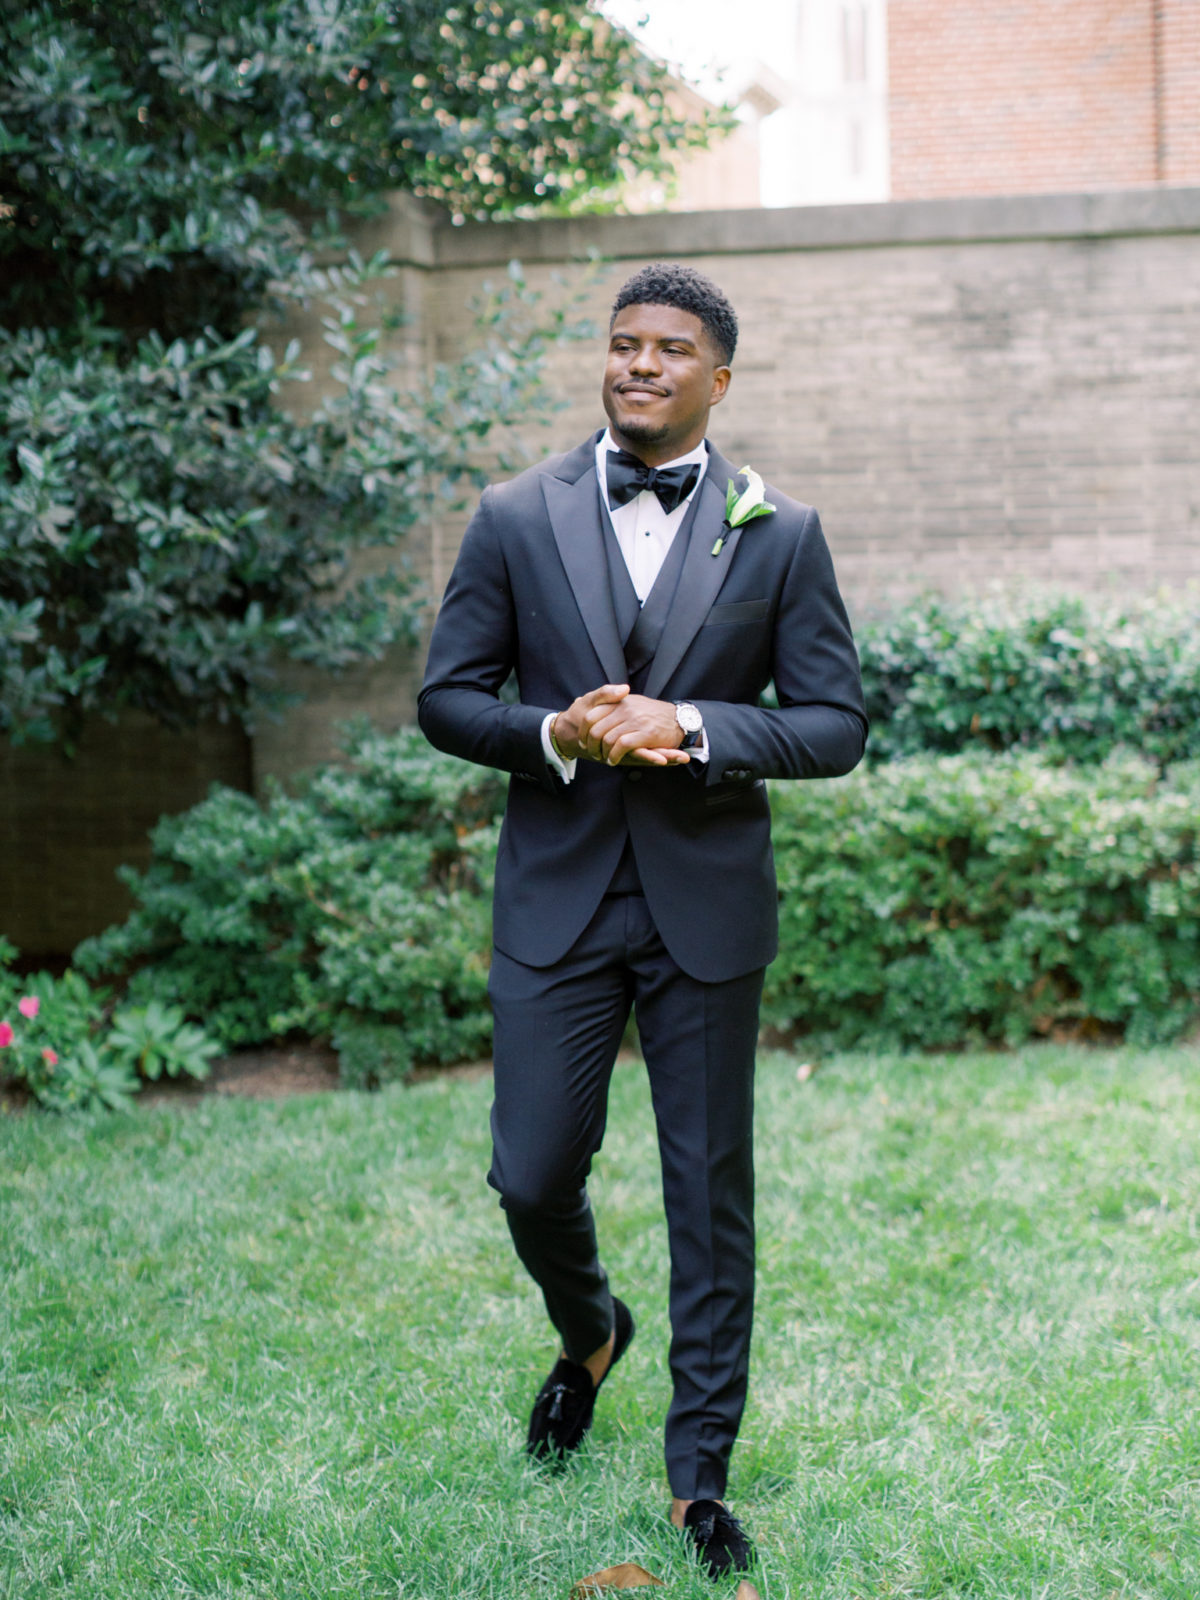 Formal wedding portraits with groom at DC wedding venue, Anderson House.